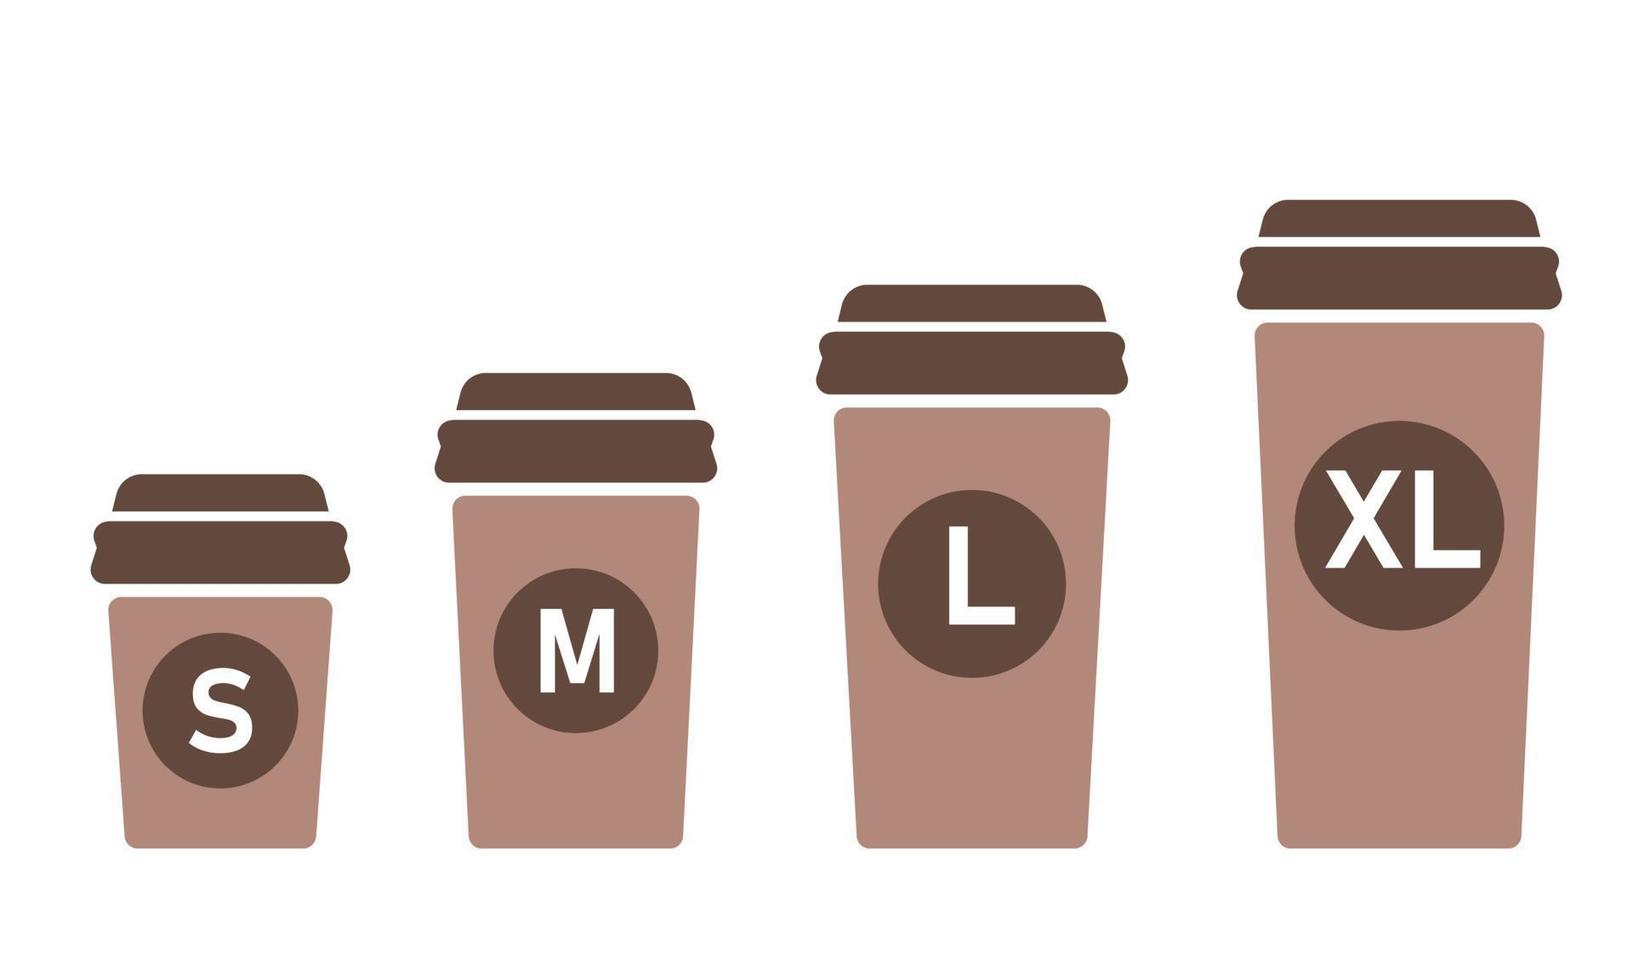 https://static.vecteezy.com/system/resources/previews/012/716/563/non_2x/take-away-drink-different-size-cup-small-medium-and-large-cup-set-recycle-mugs-illustration-on-white-background-vector.jpg